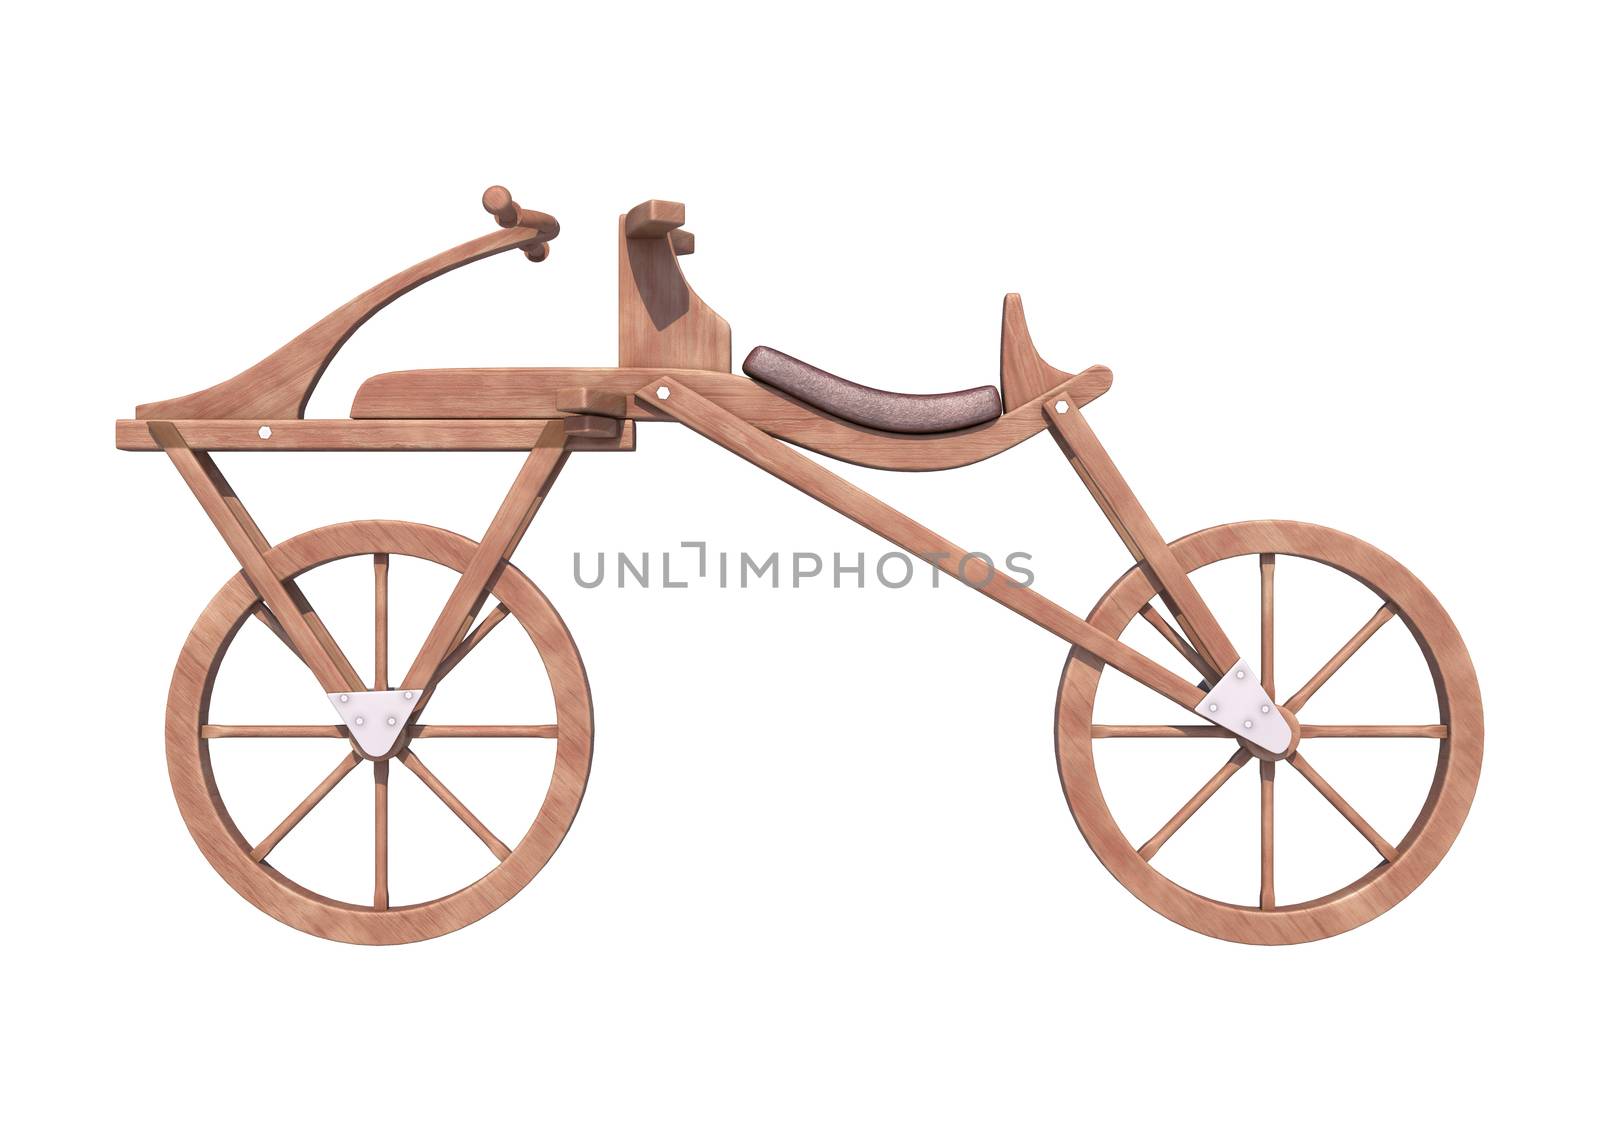 3D digital render of an old fashioned bicycle isolated on white background